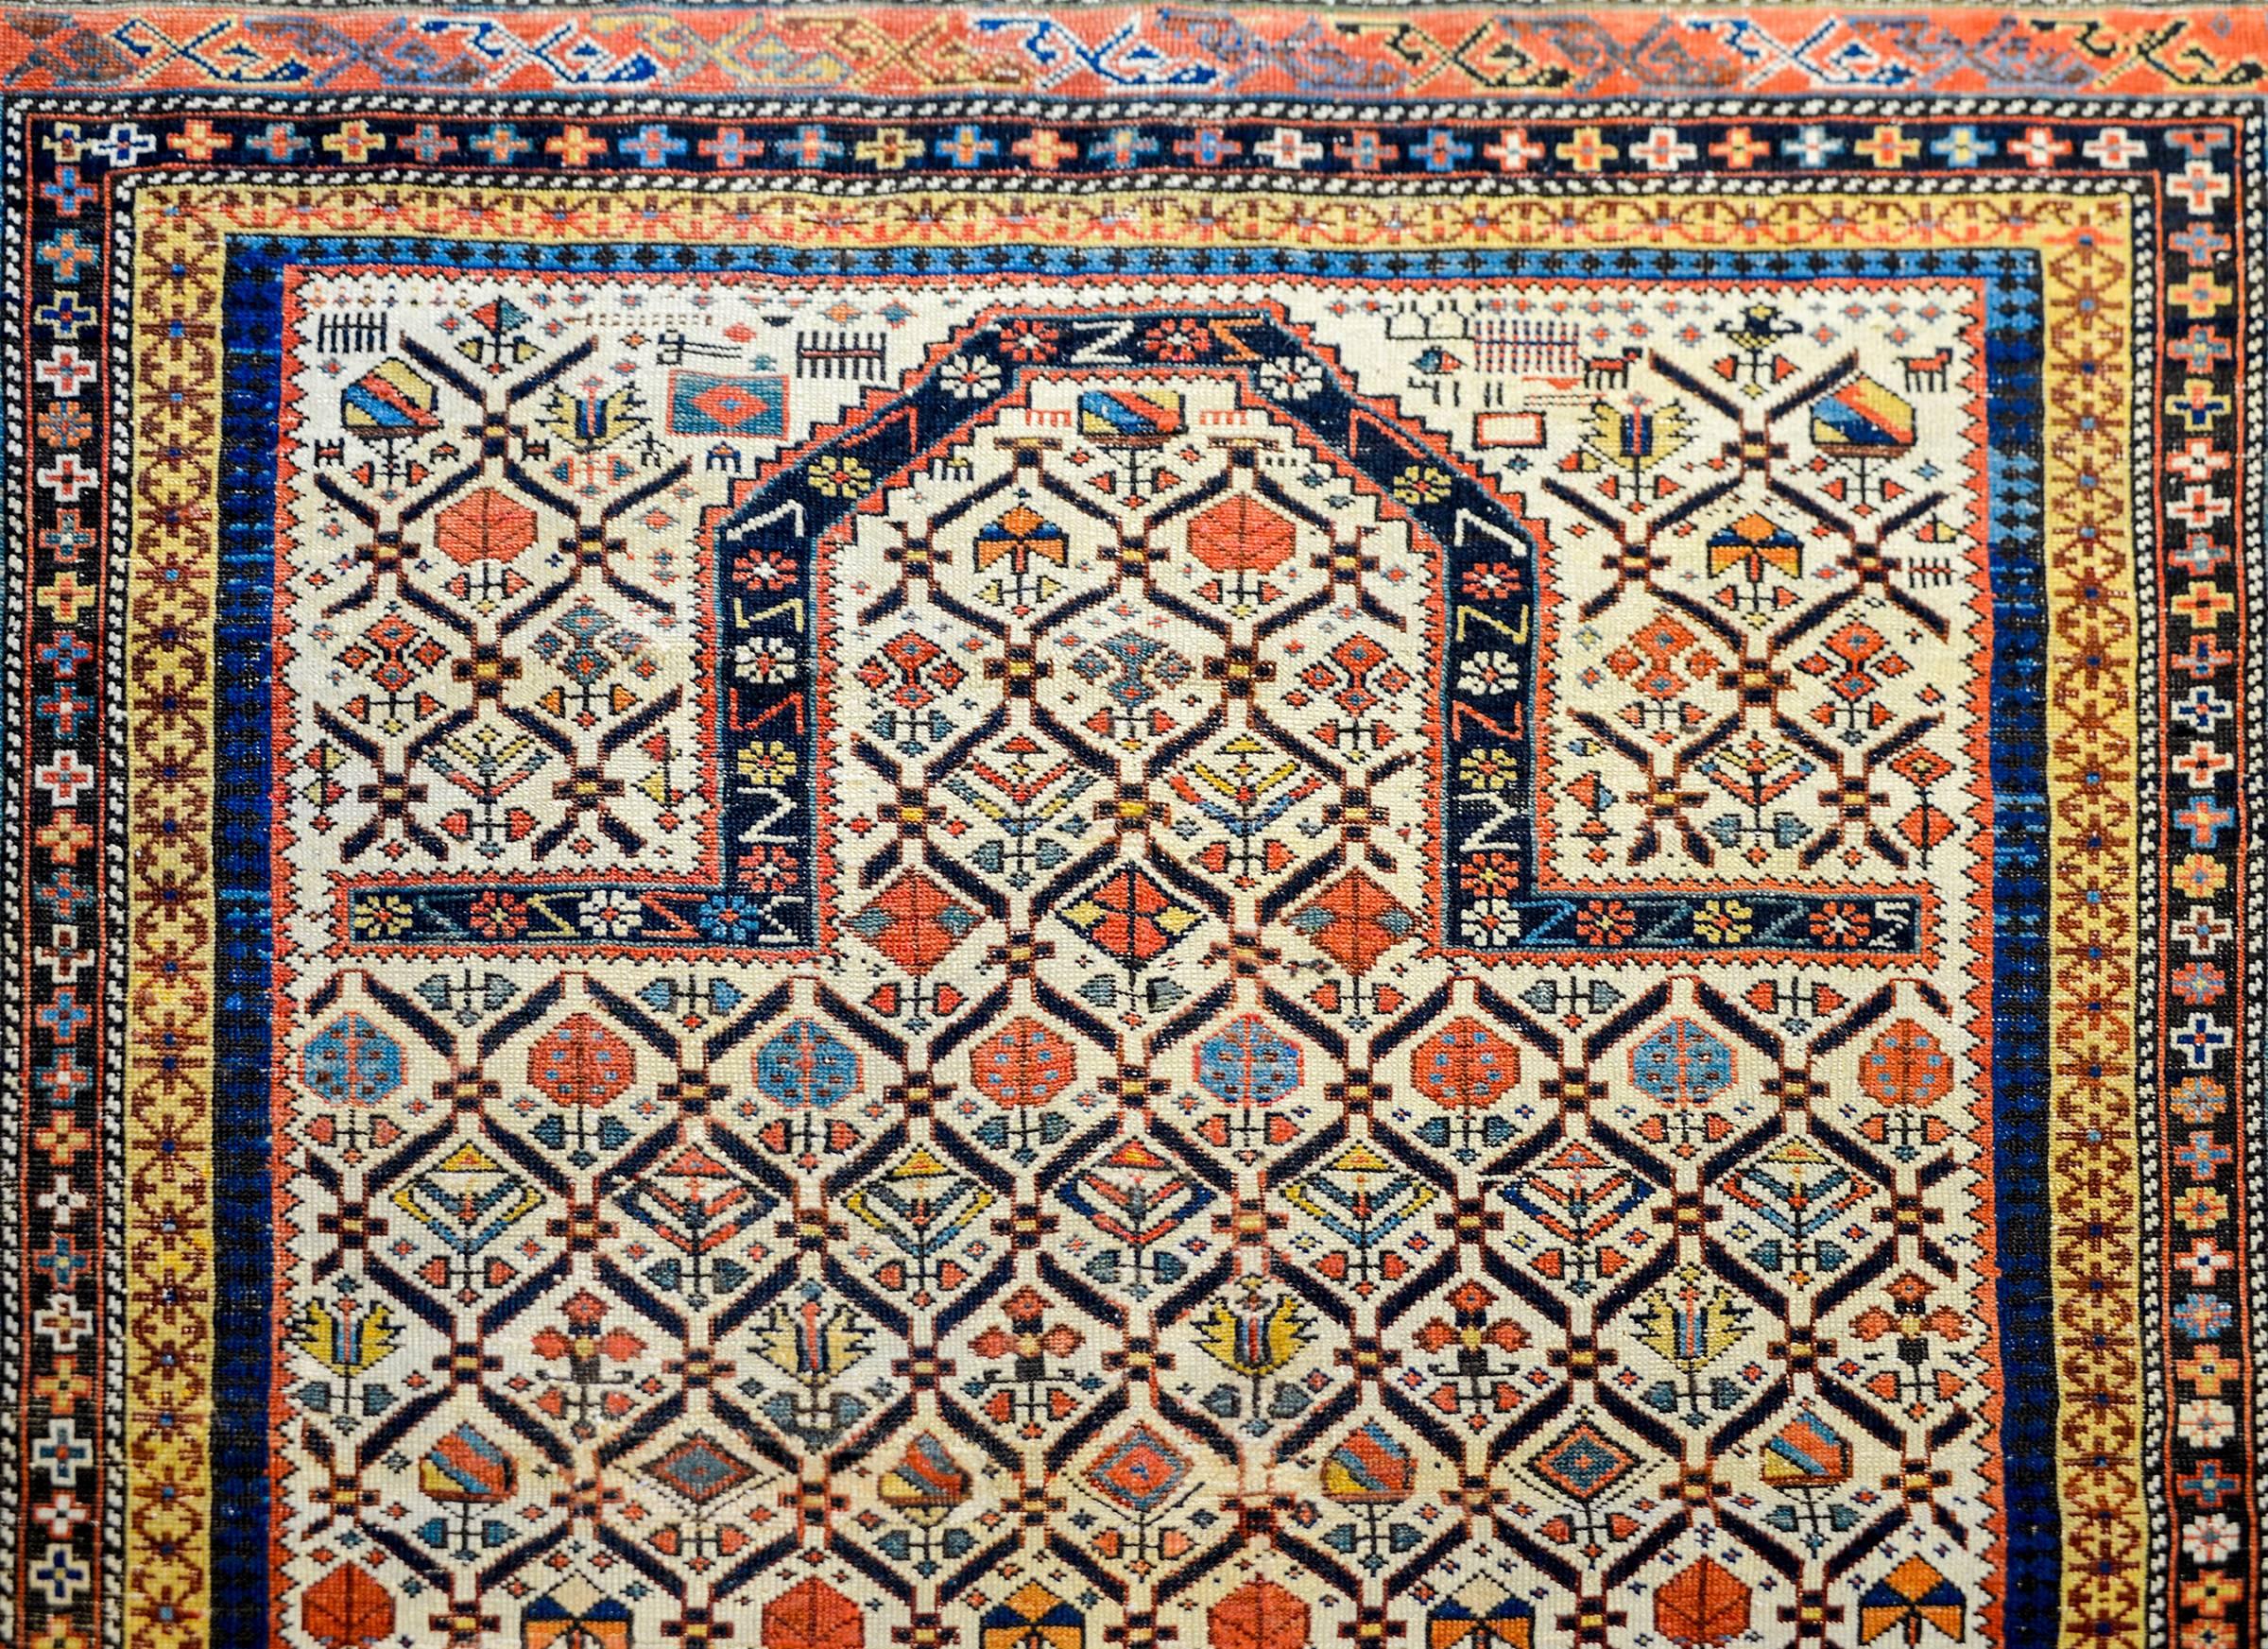 A beautiful late 19th century antique Persian Shirvan prayer rug with an incredible stylized multicolored floral pattern field and woven with in crimson, indigo, white, gold, indigo, and brown natural vegetable dyed wool on a white background. The